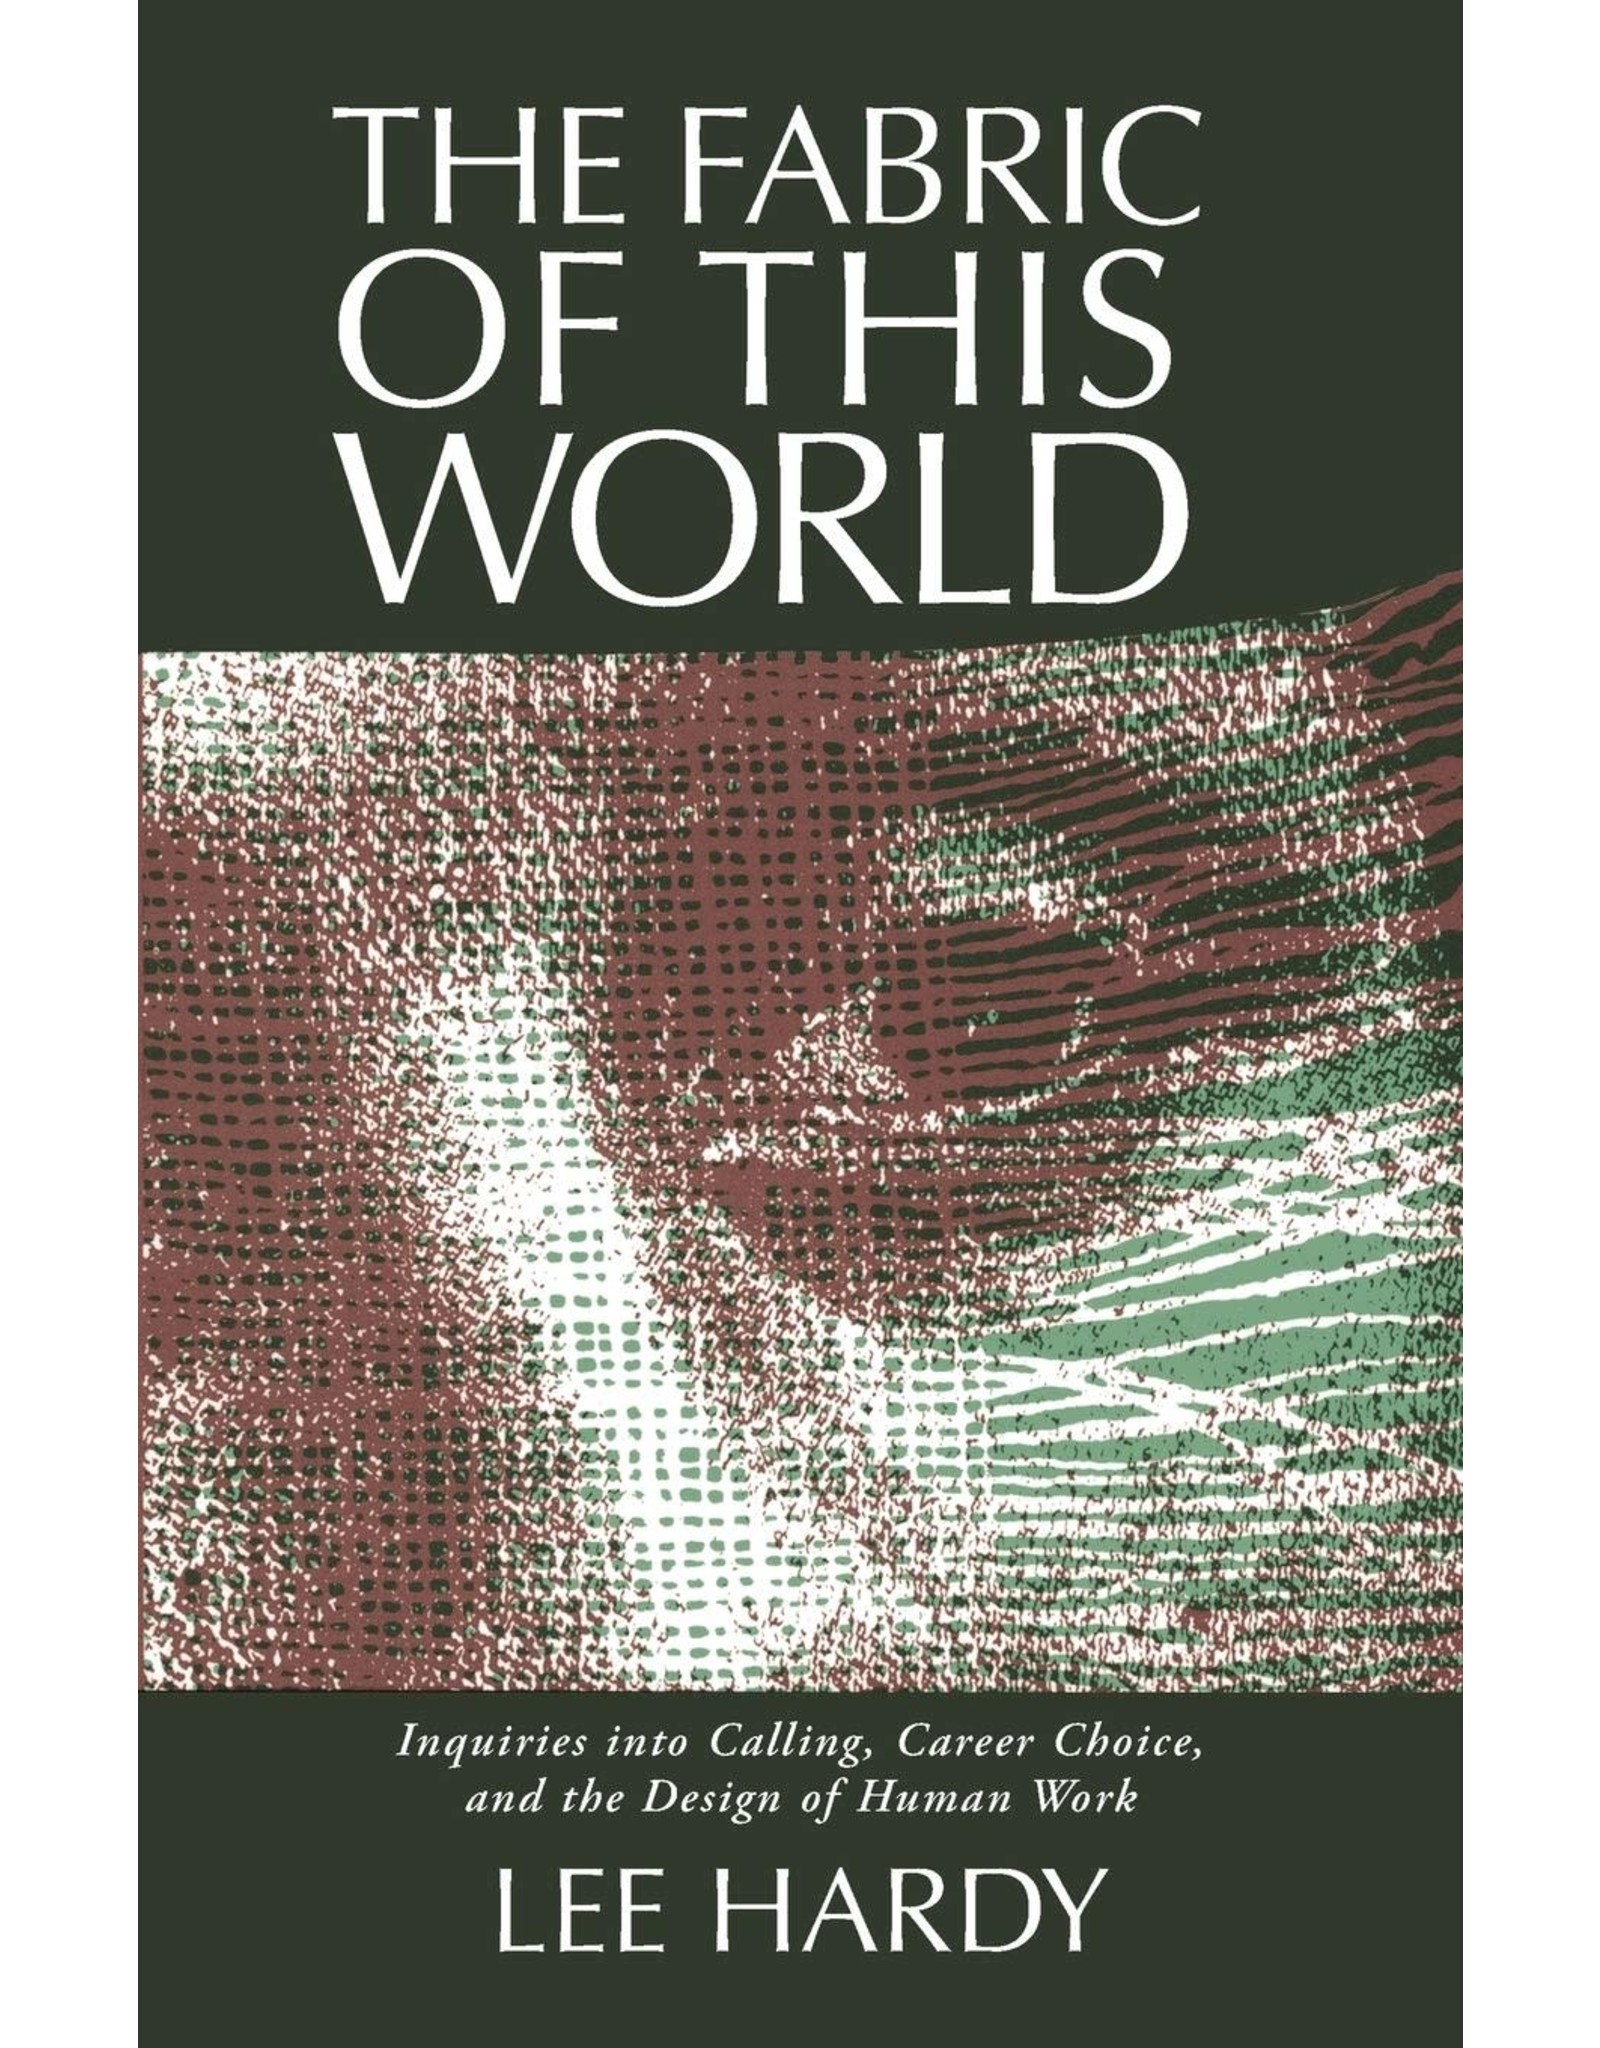 The Fabric of This World: Inquiries into Calling, Career Choice, and the Design of Human Work